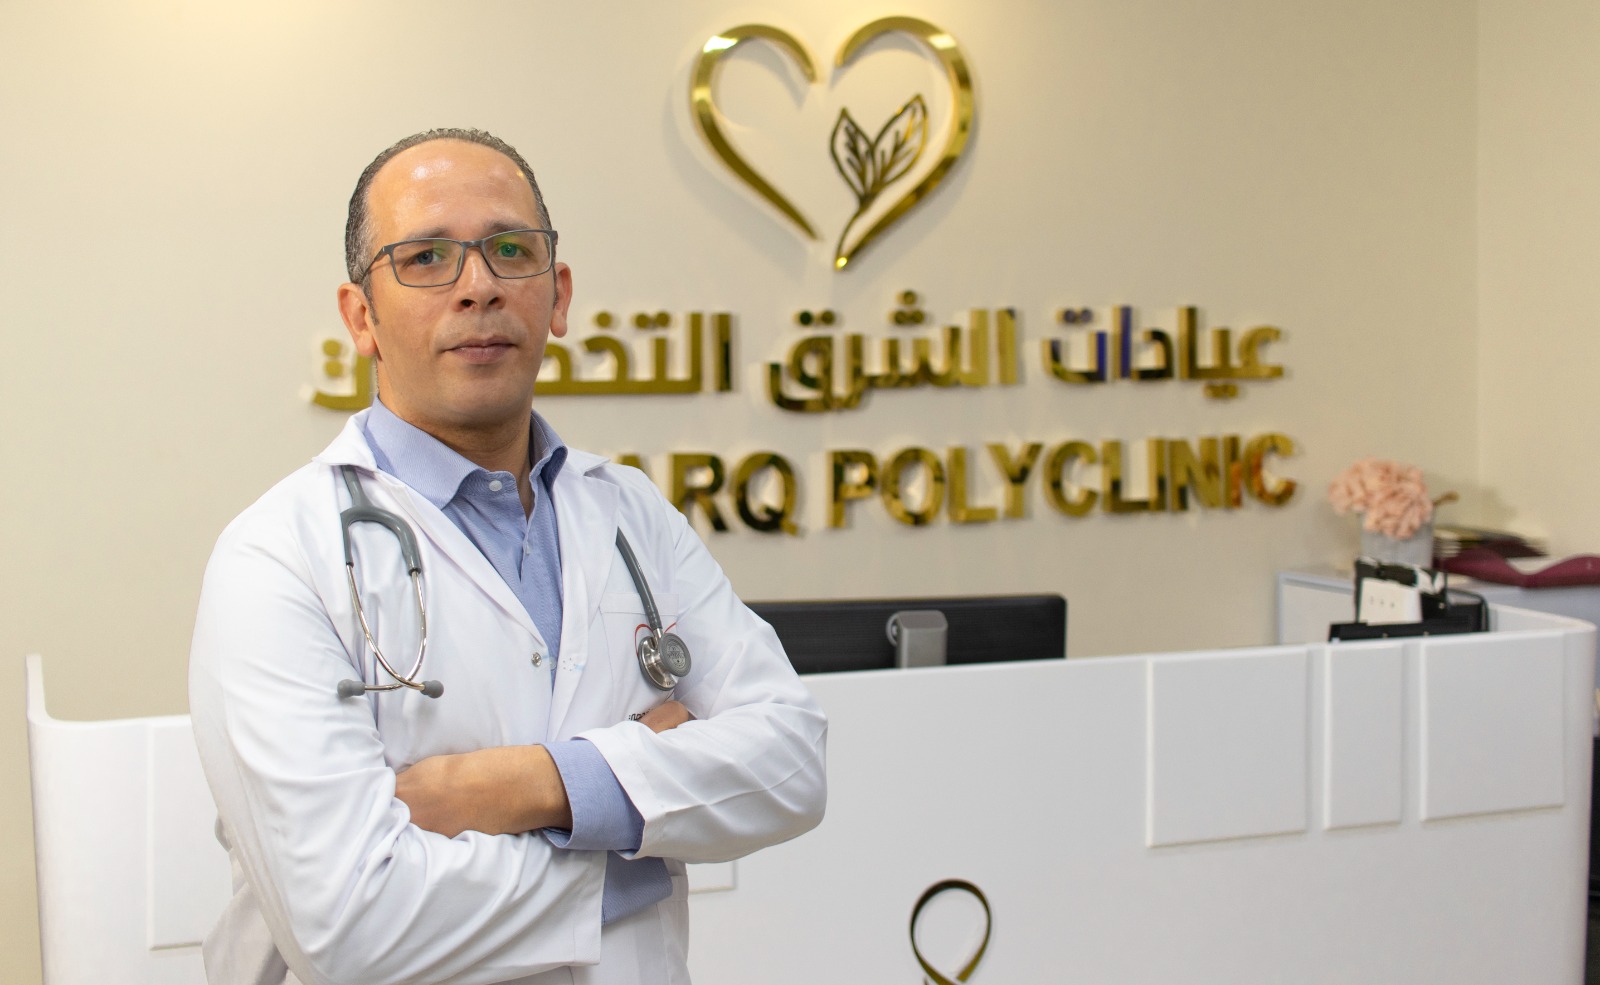 Dr. Walid Soliman